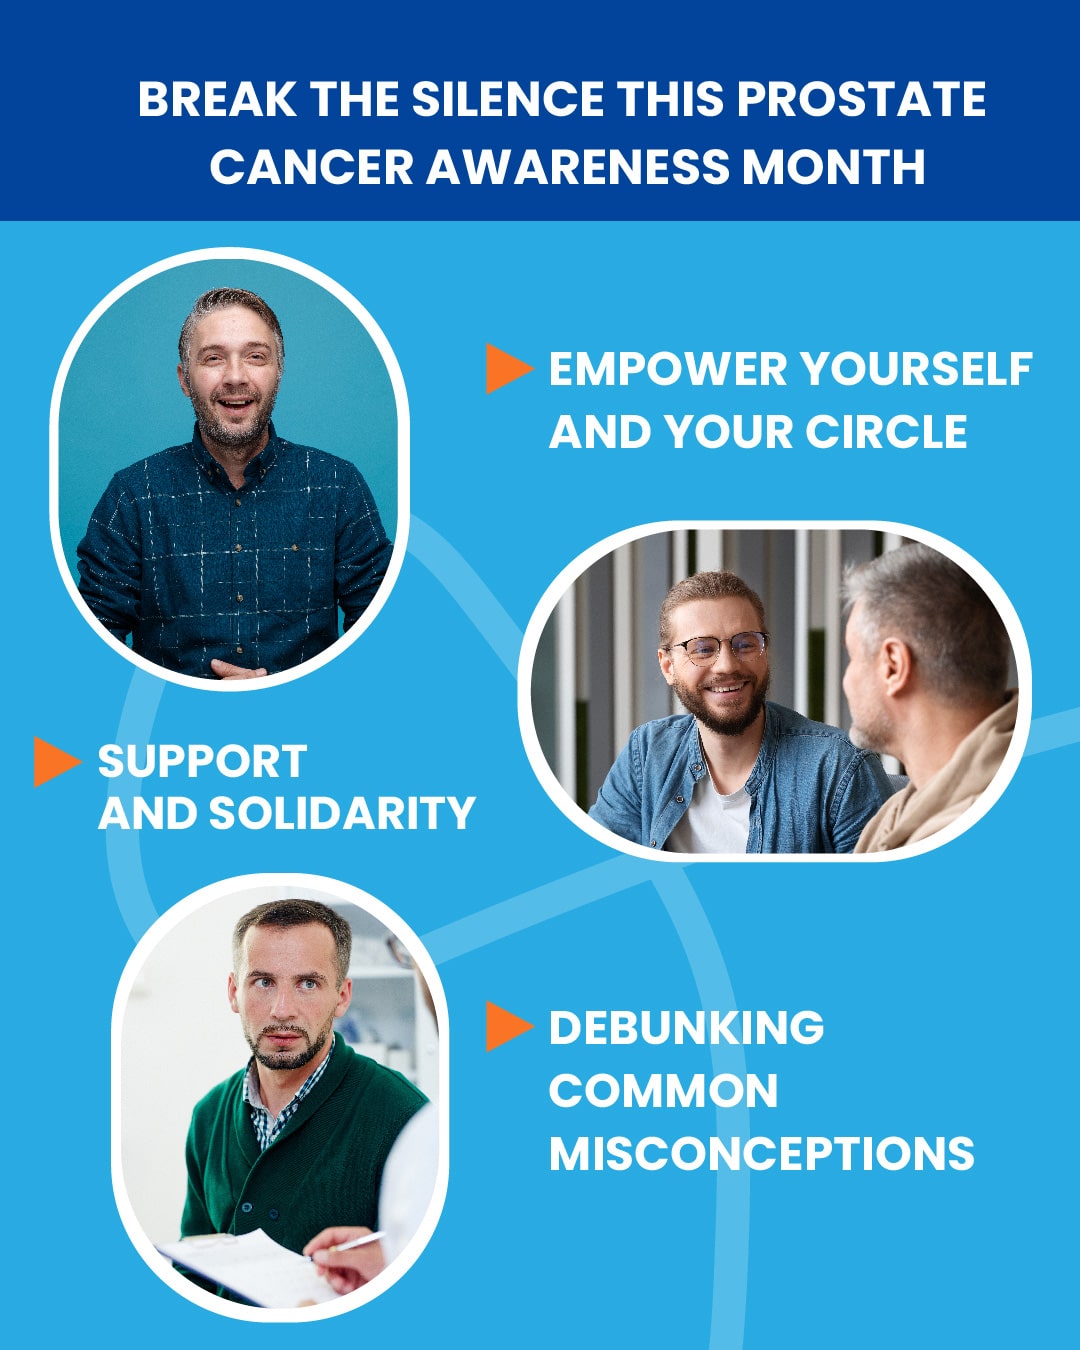 Infographic highlighting key points of Prostate Cancer Awareness Month